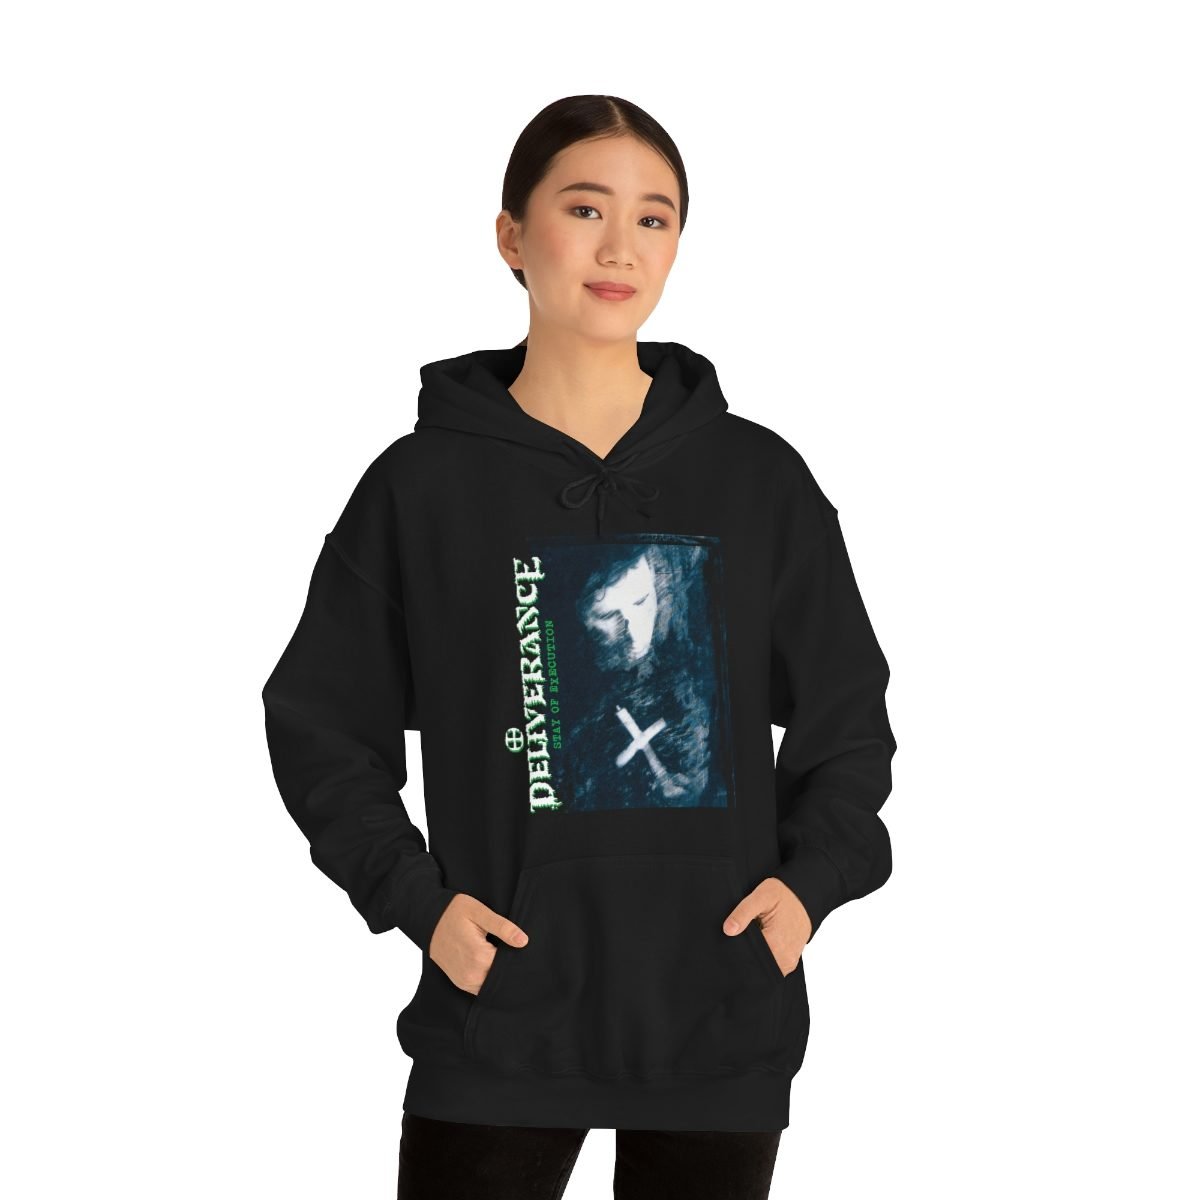 Deliverance – Stay of Execution (Dark) Pullover Hooded Sweatshirt